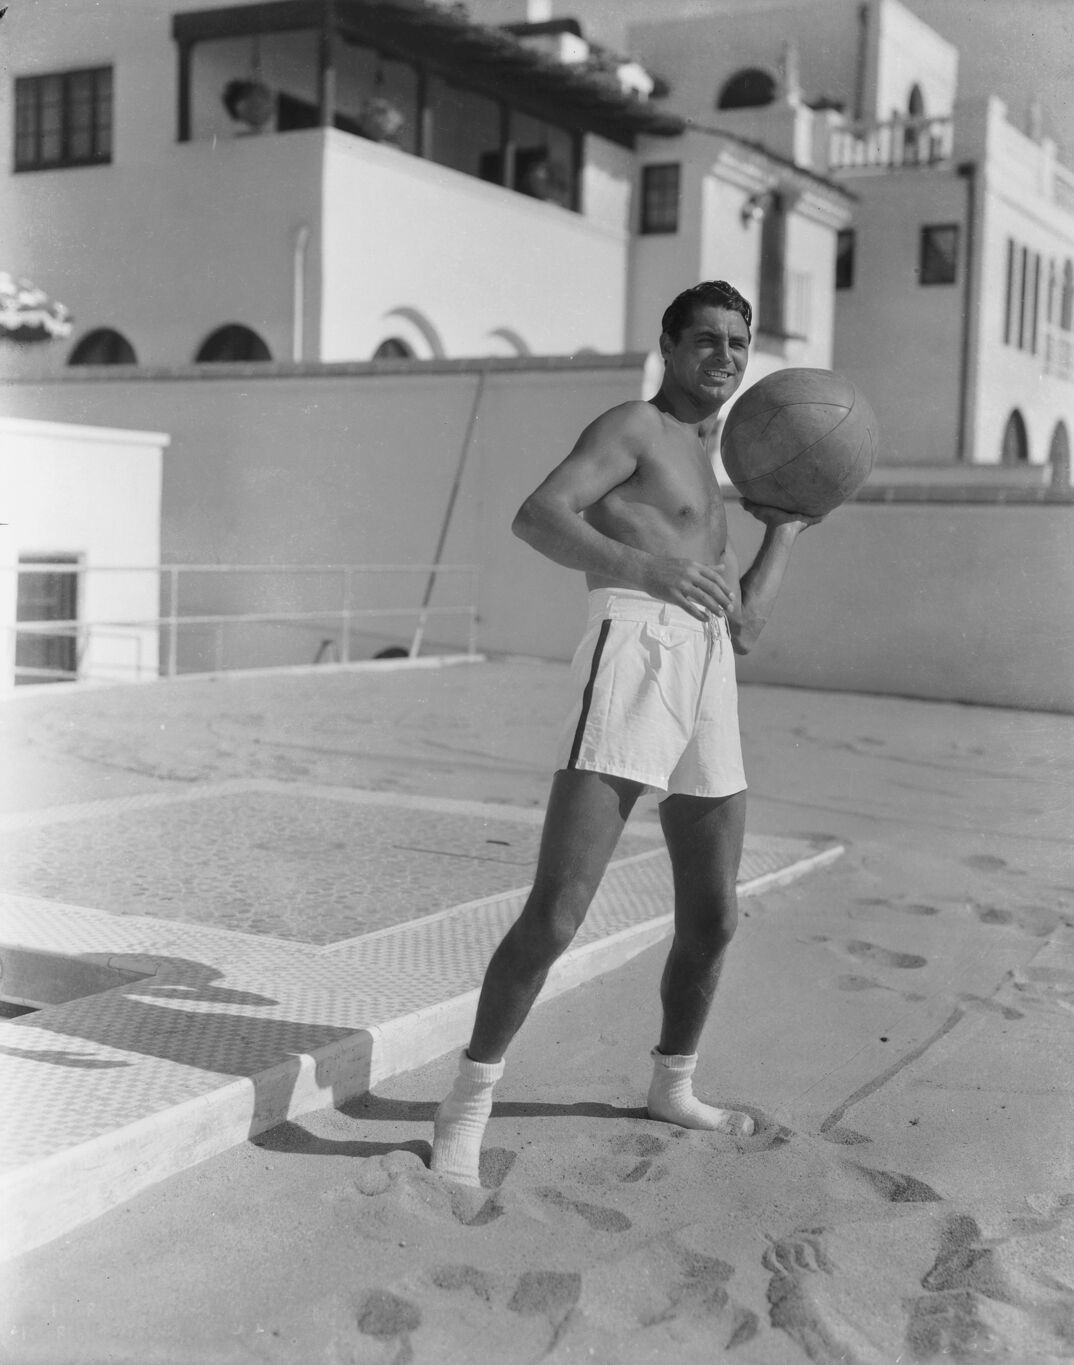 1935:  British born actor Cary Grant (1904 - 1986), born Archibald Leach, playing with a ball at the beach house he shared with the American actor, Randolph Scott.  (Photo via John Kobal Foundation/Getty Images)